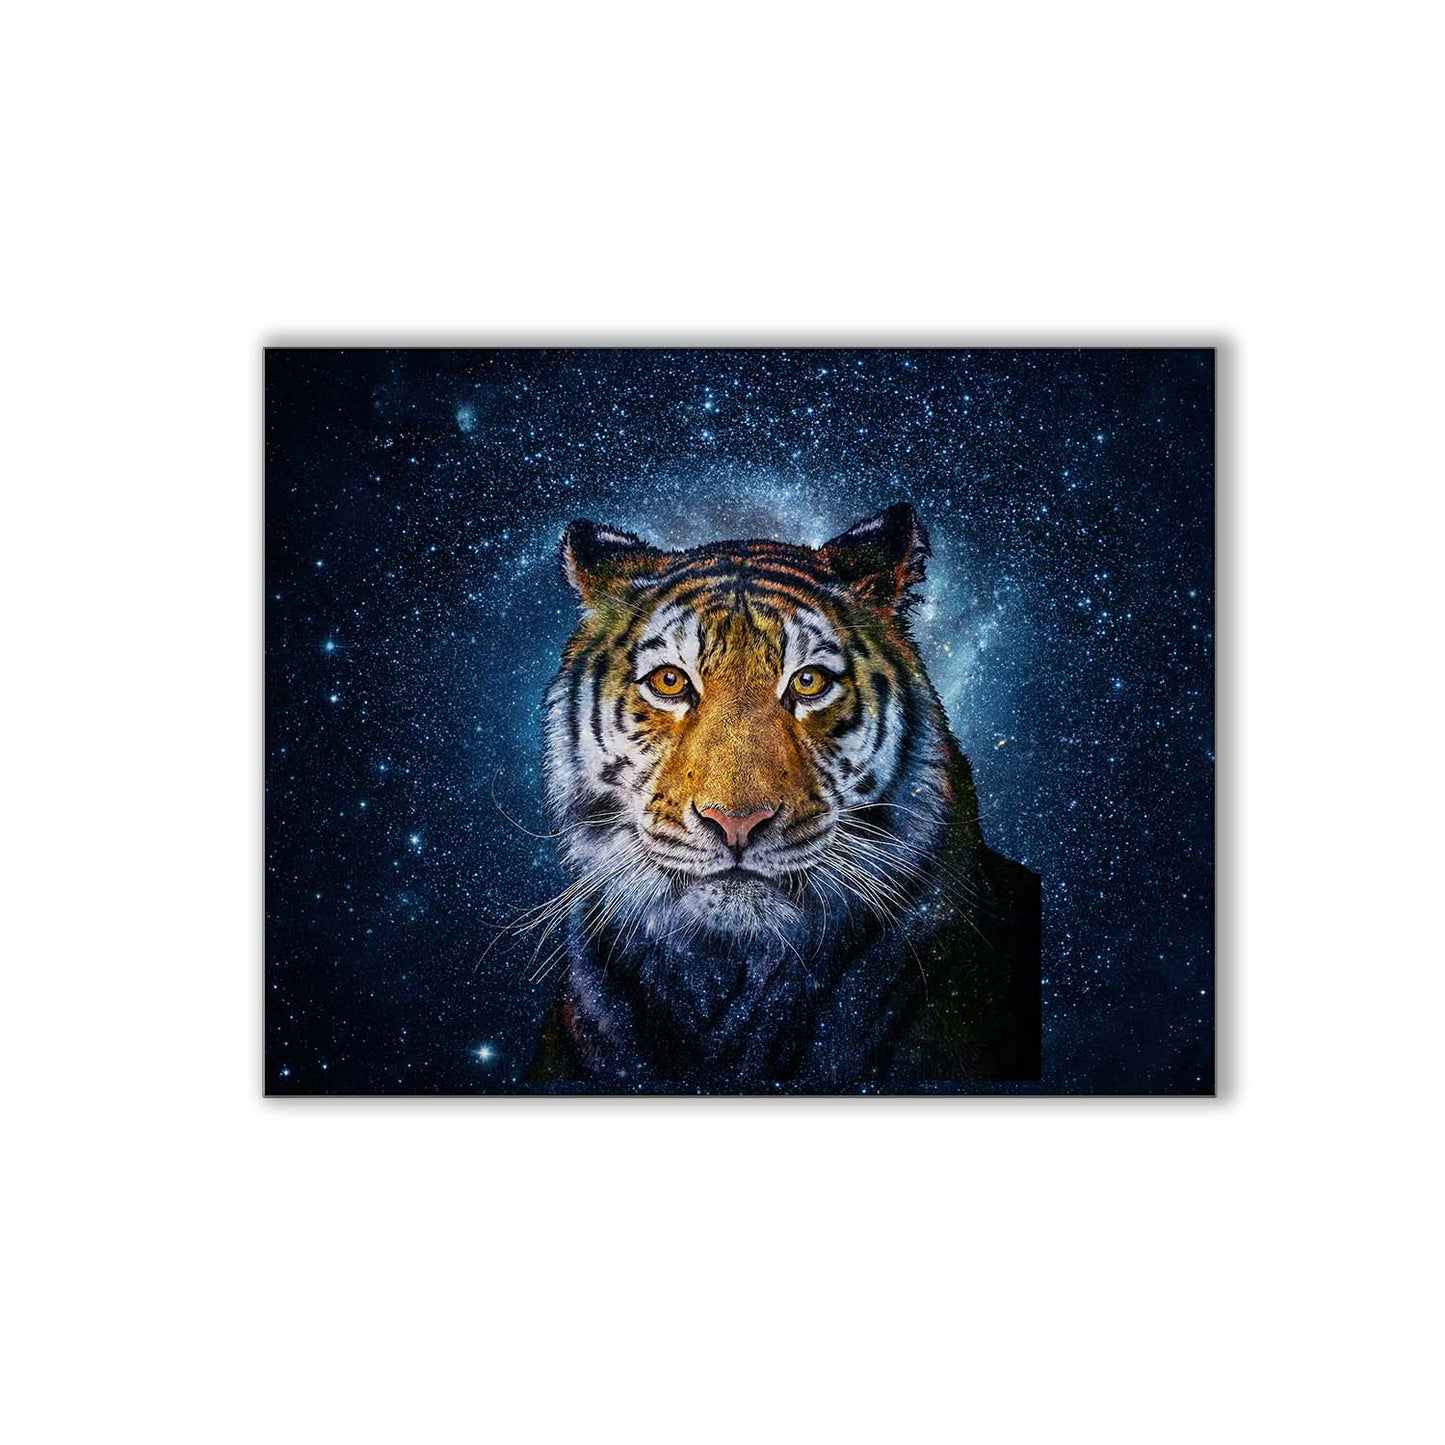 Detailed Tiger Head with Celestial Background 48X36